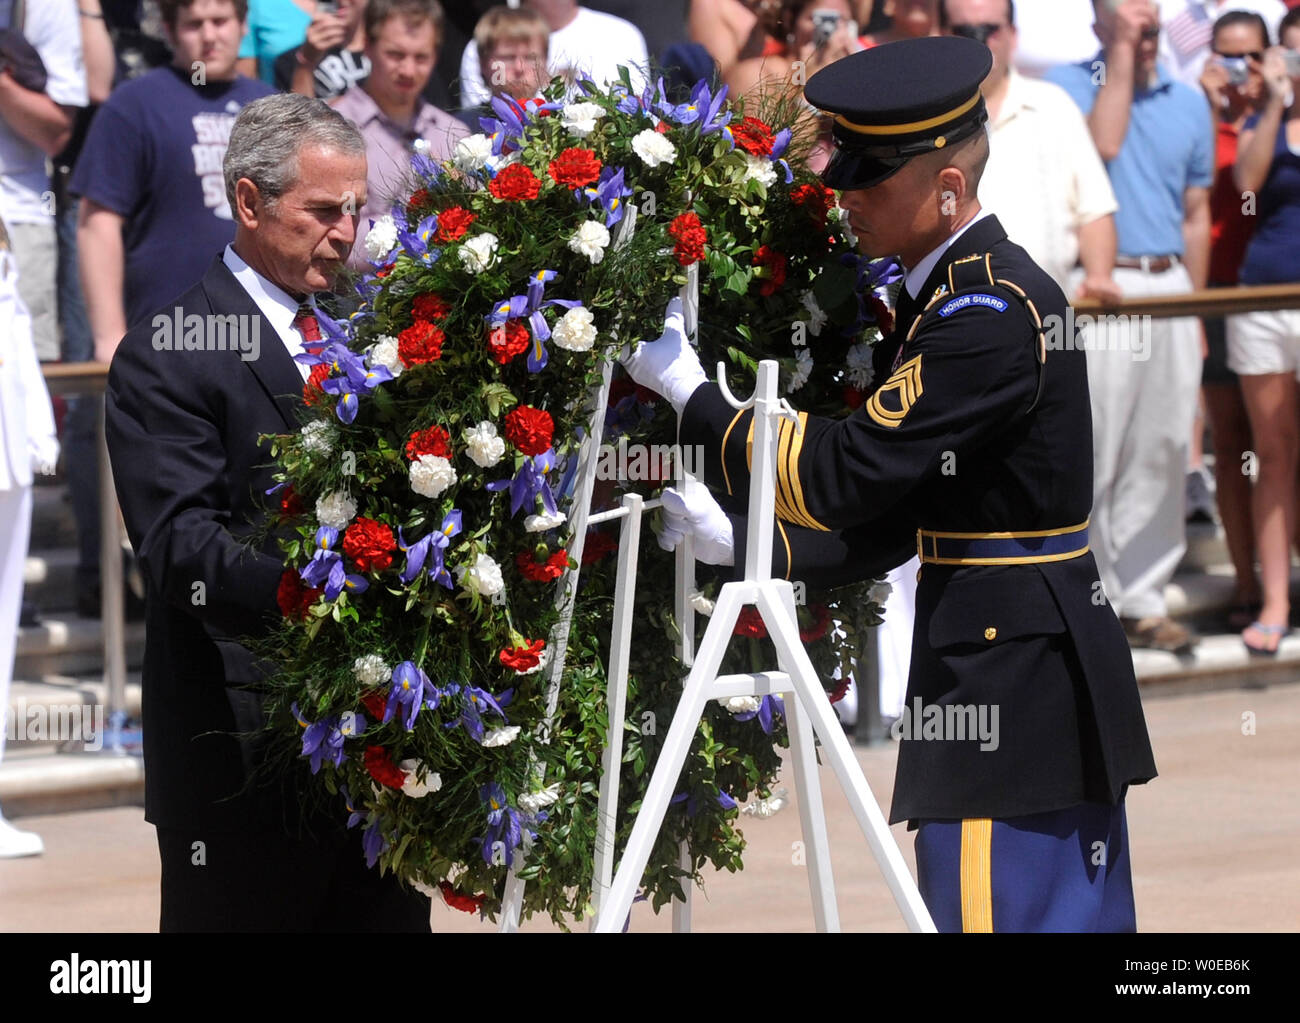 U.S. President George W. Bush (L) and a member of the Army Honor Guard participate in a wreath laying ceremony at the Tomb of the Unknown Soldiers at Arlington National Cemetary on Memorial Day, May 26, 2008 in Arlington, Virginia. (UPI Photo/Kevin Dietsch) Stock Photo